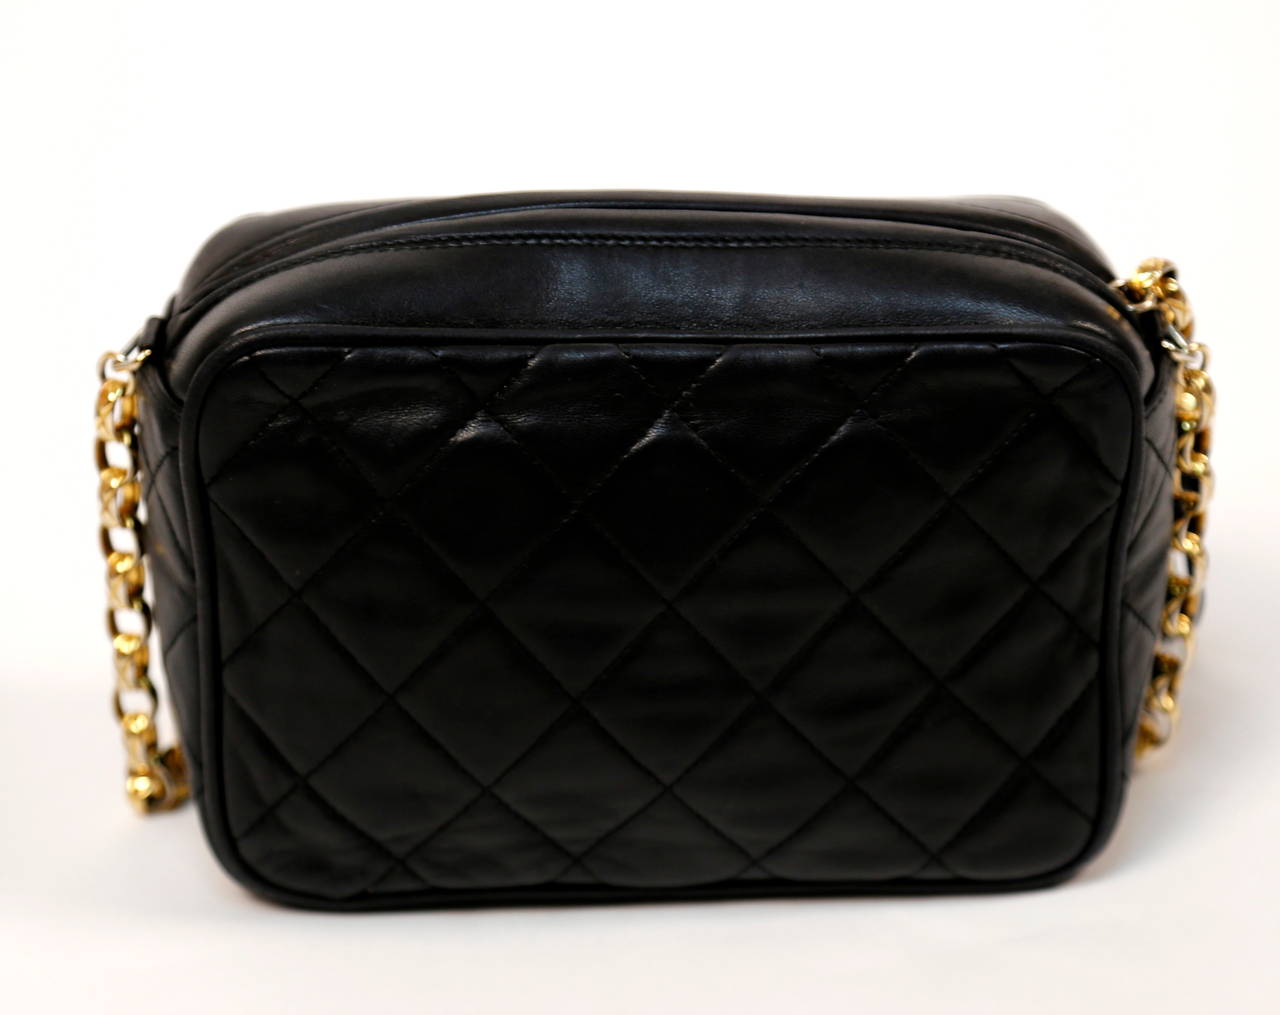 Jet black quilted lambskin leather bag with tassel, long gilt chain and 'CC' turn lock closure from Chanel dating to the early 1990's. Approximate measurements: width 7